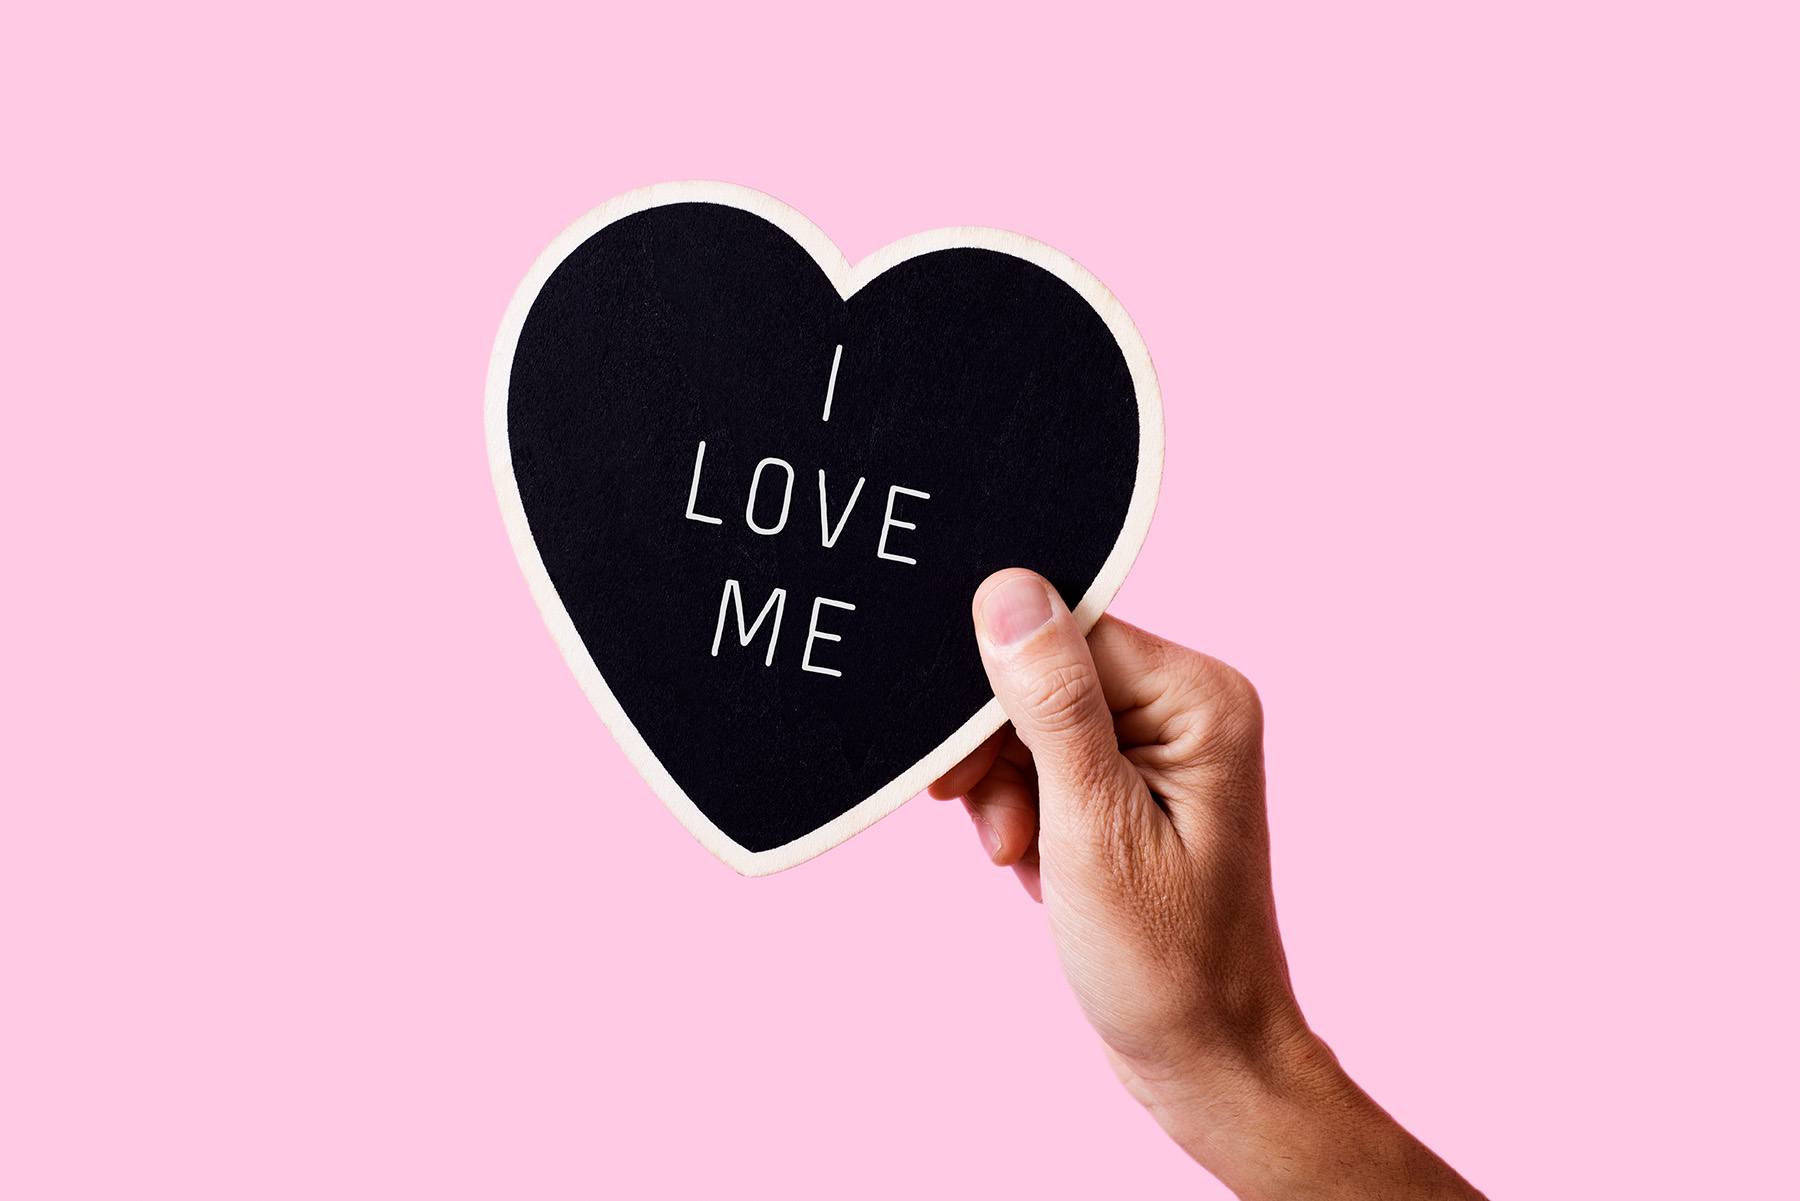 Hand holds up sign that says I Love Me against pink background